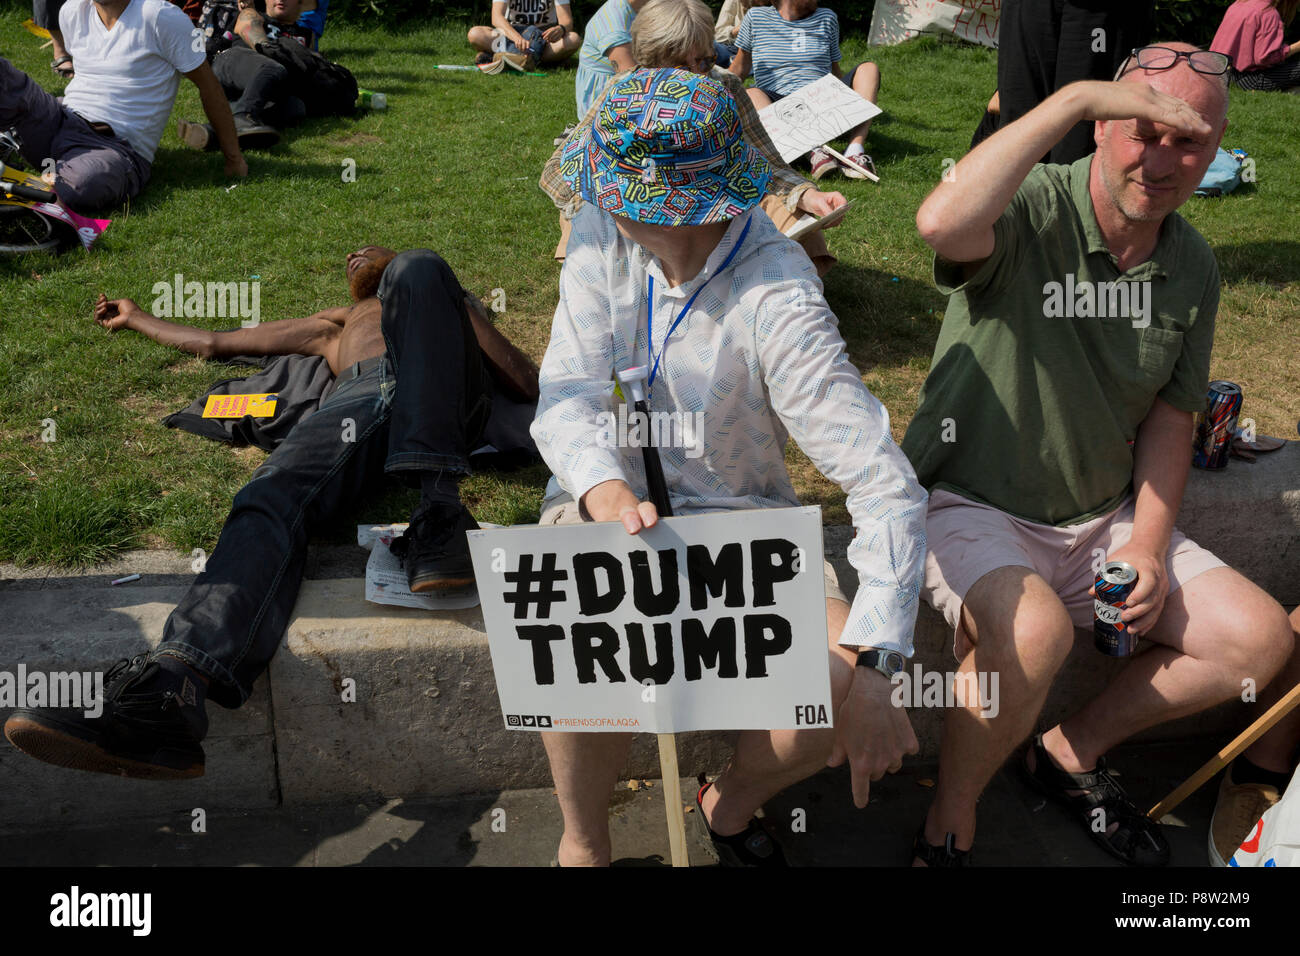 London, UK: Protesters against the visit of US President Donald Trump to the UK, march through central London, on 13th July 2018, in London, England.  Photo by Richard Baker / Alamy Live News Stock Photo